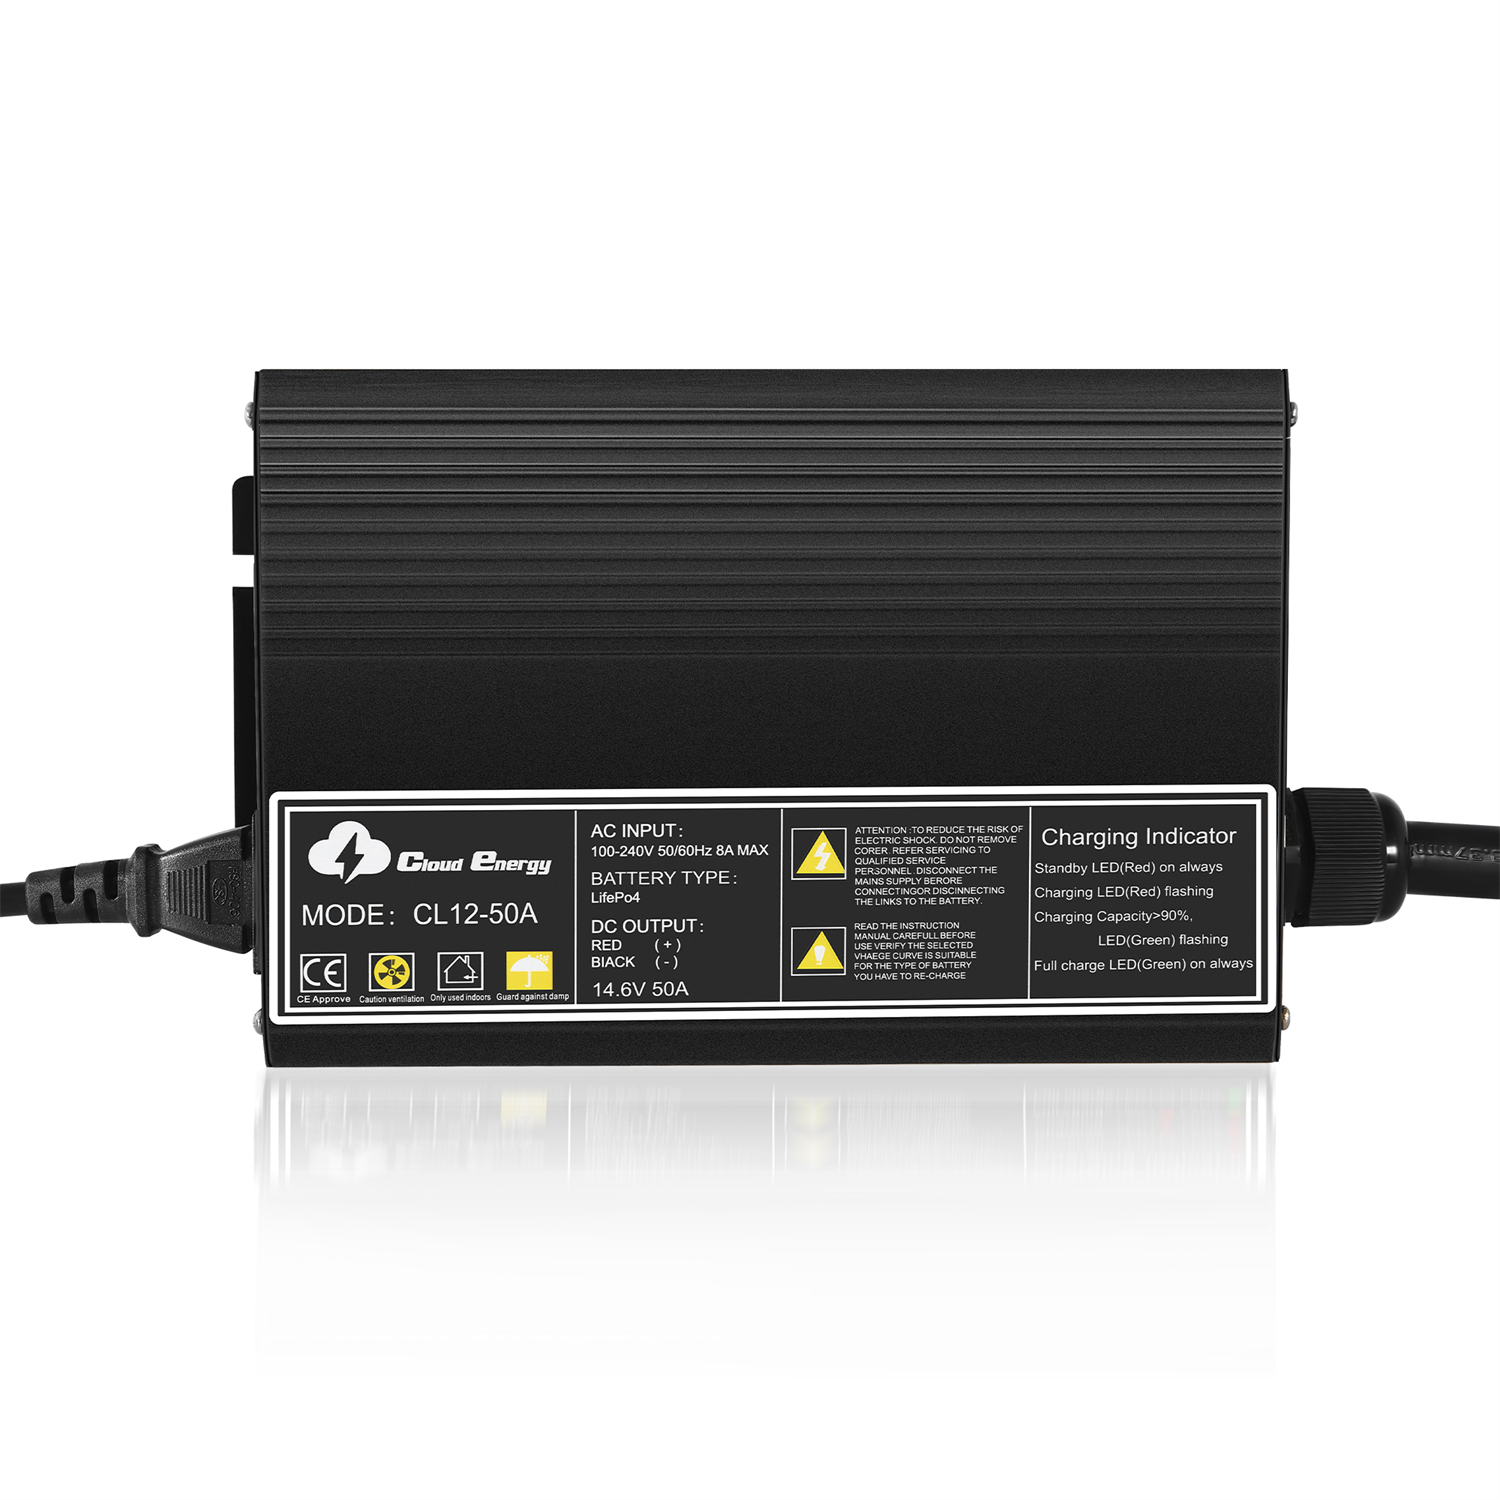 Cloudenergy 12V-50A Battery Charger Front View